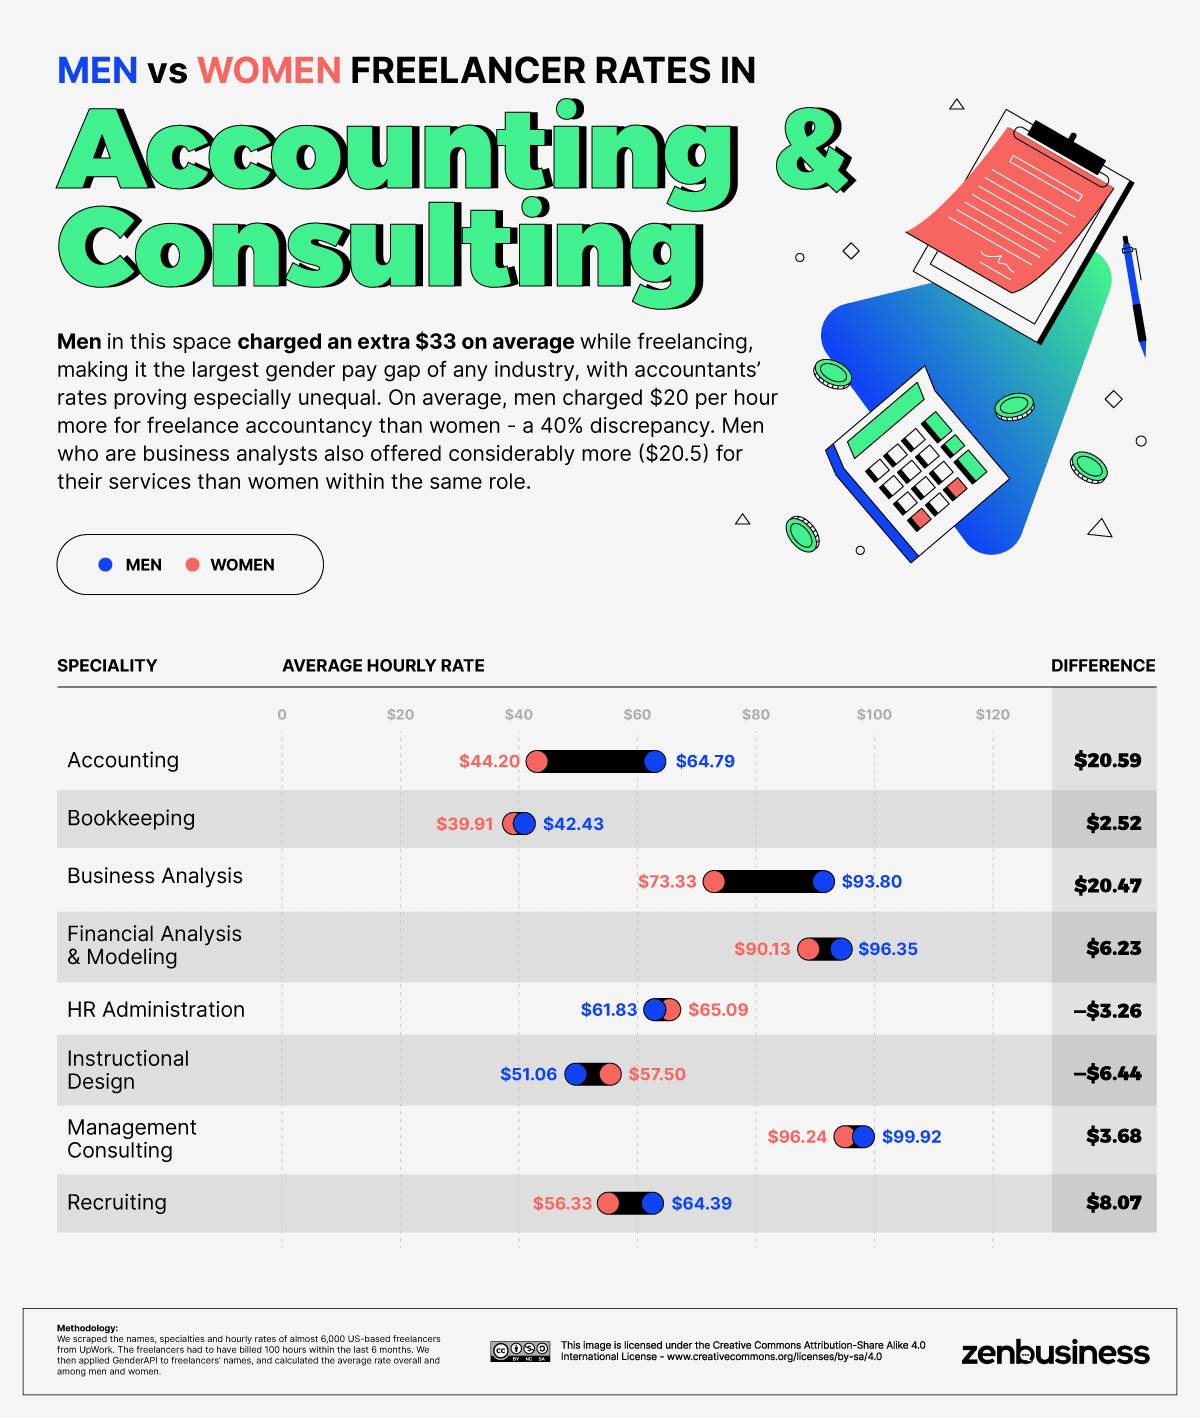 men vs women freelancer rates in accounting and consulting